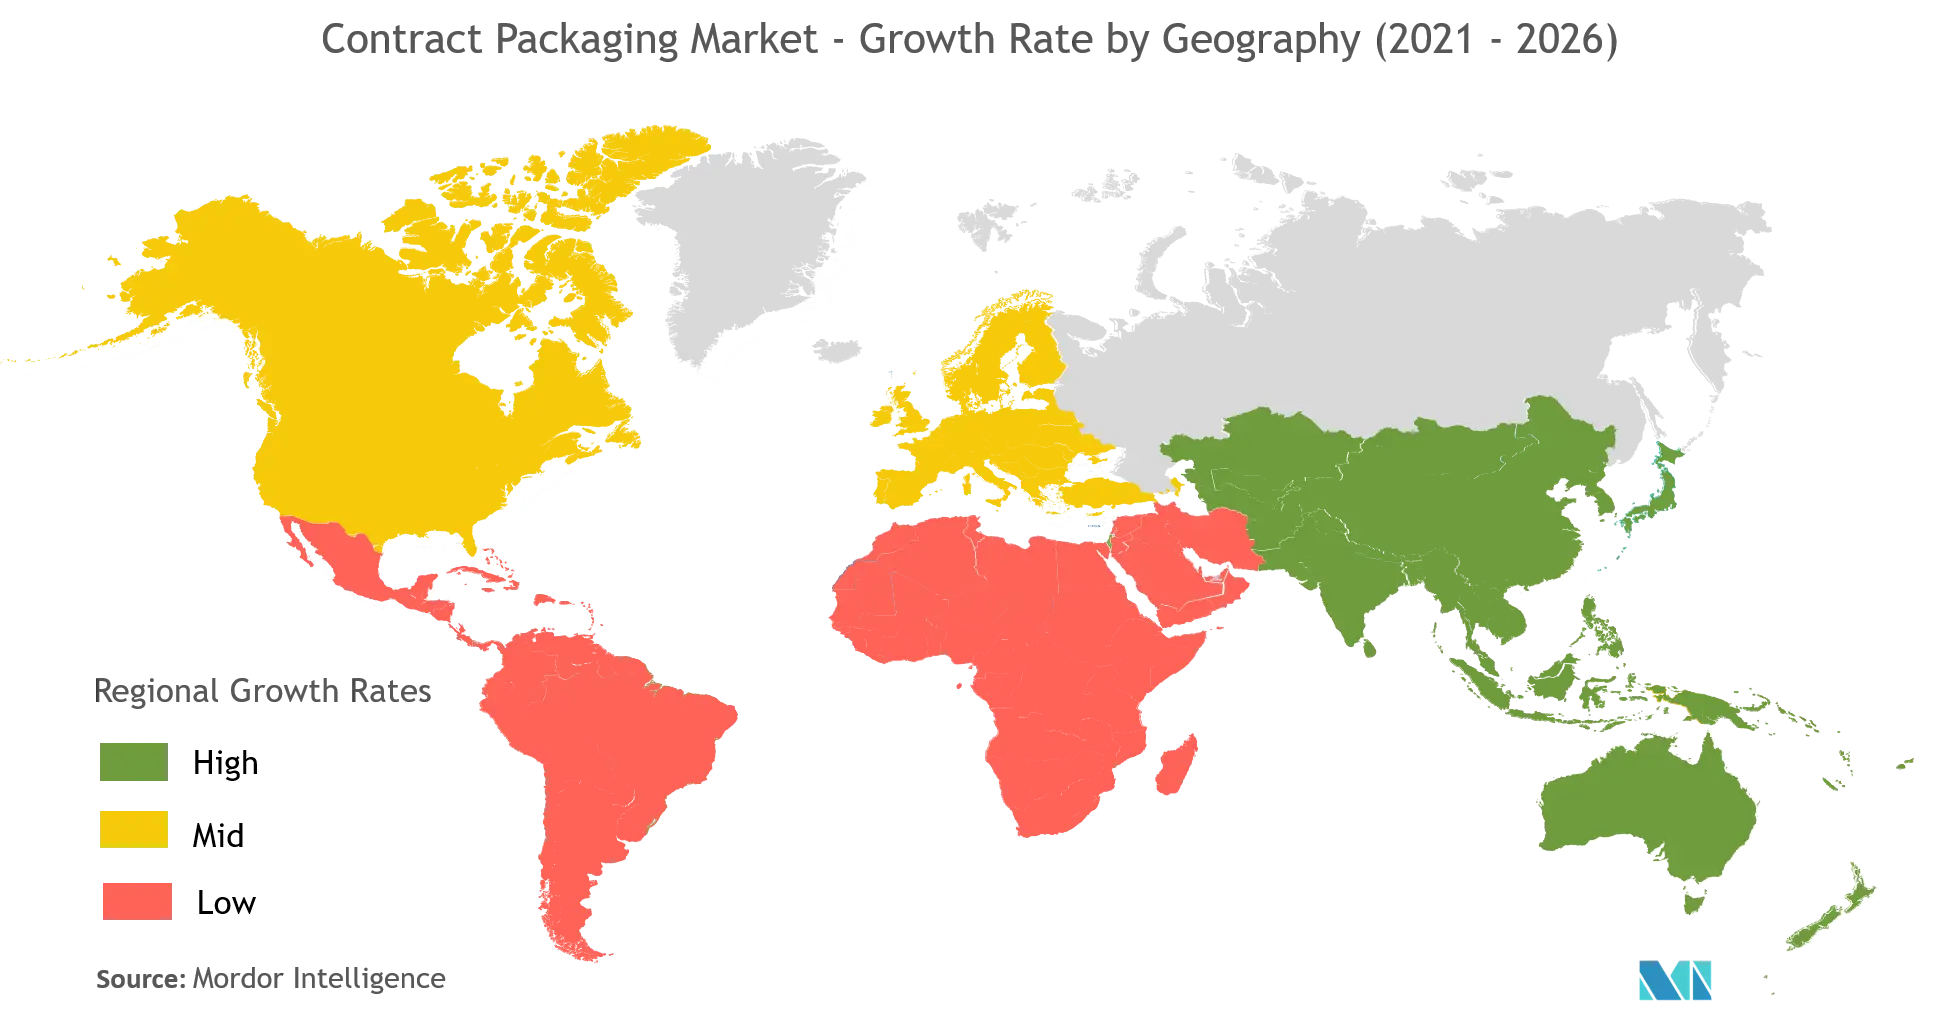 Contract Packaging Market : Growth Rate by Geography (2021-2026)